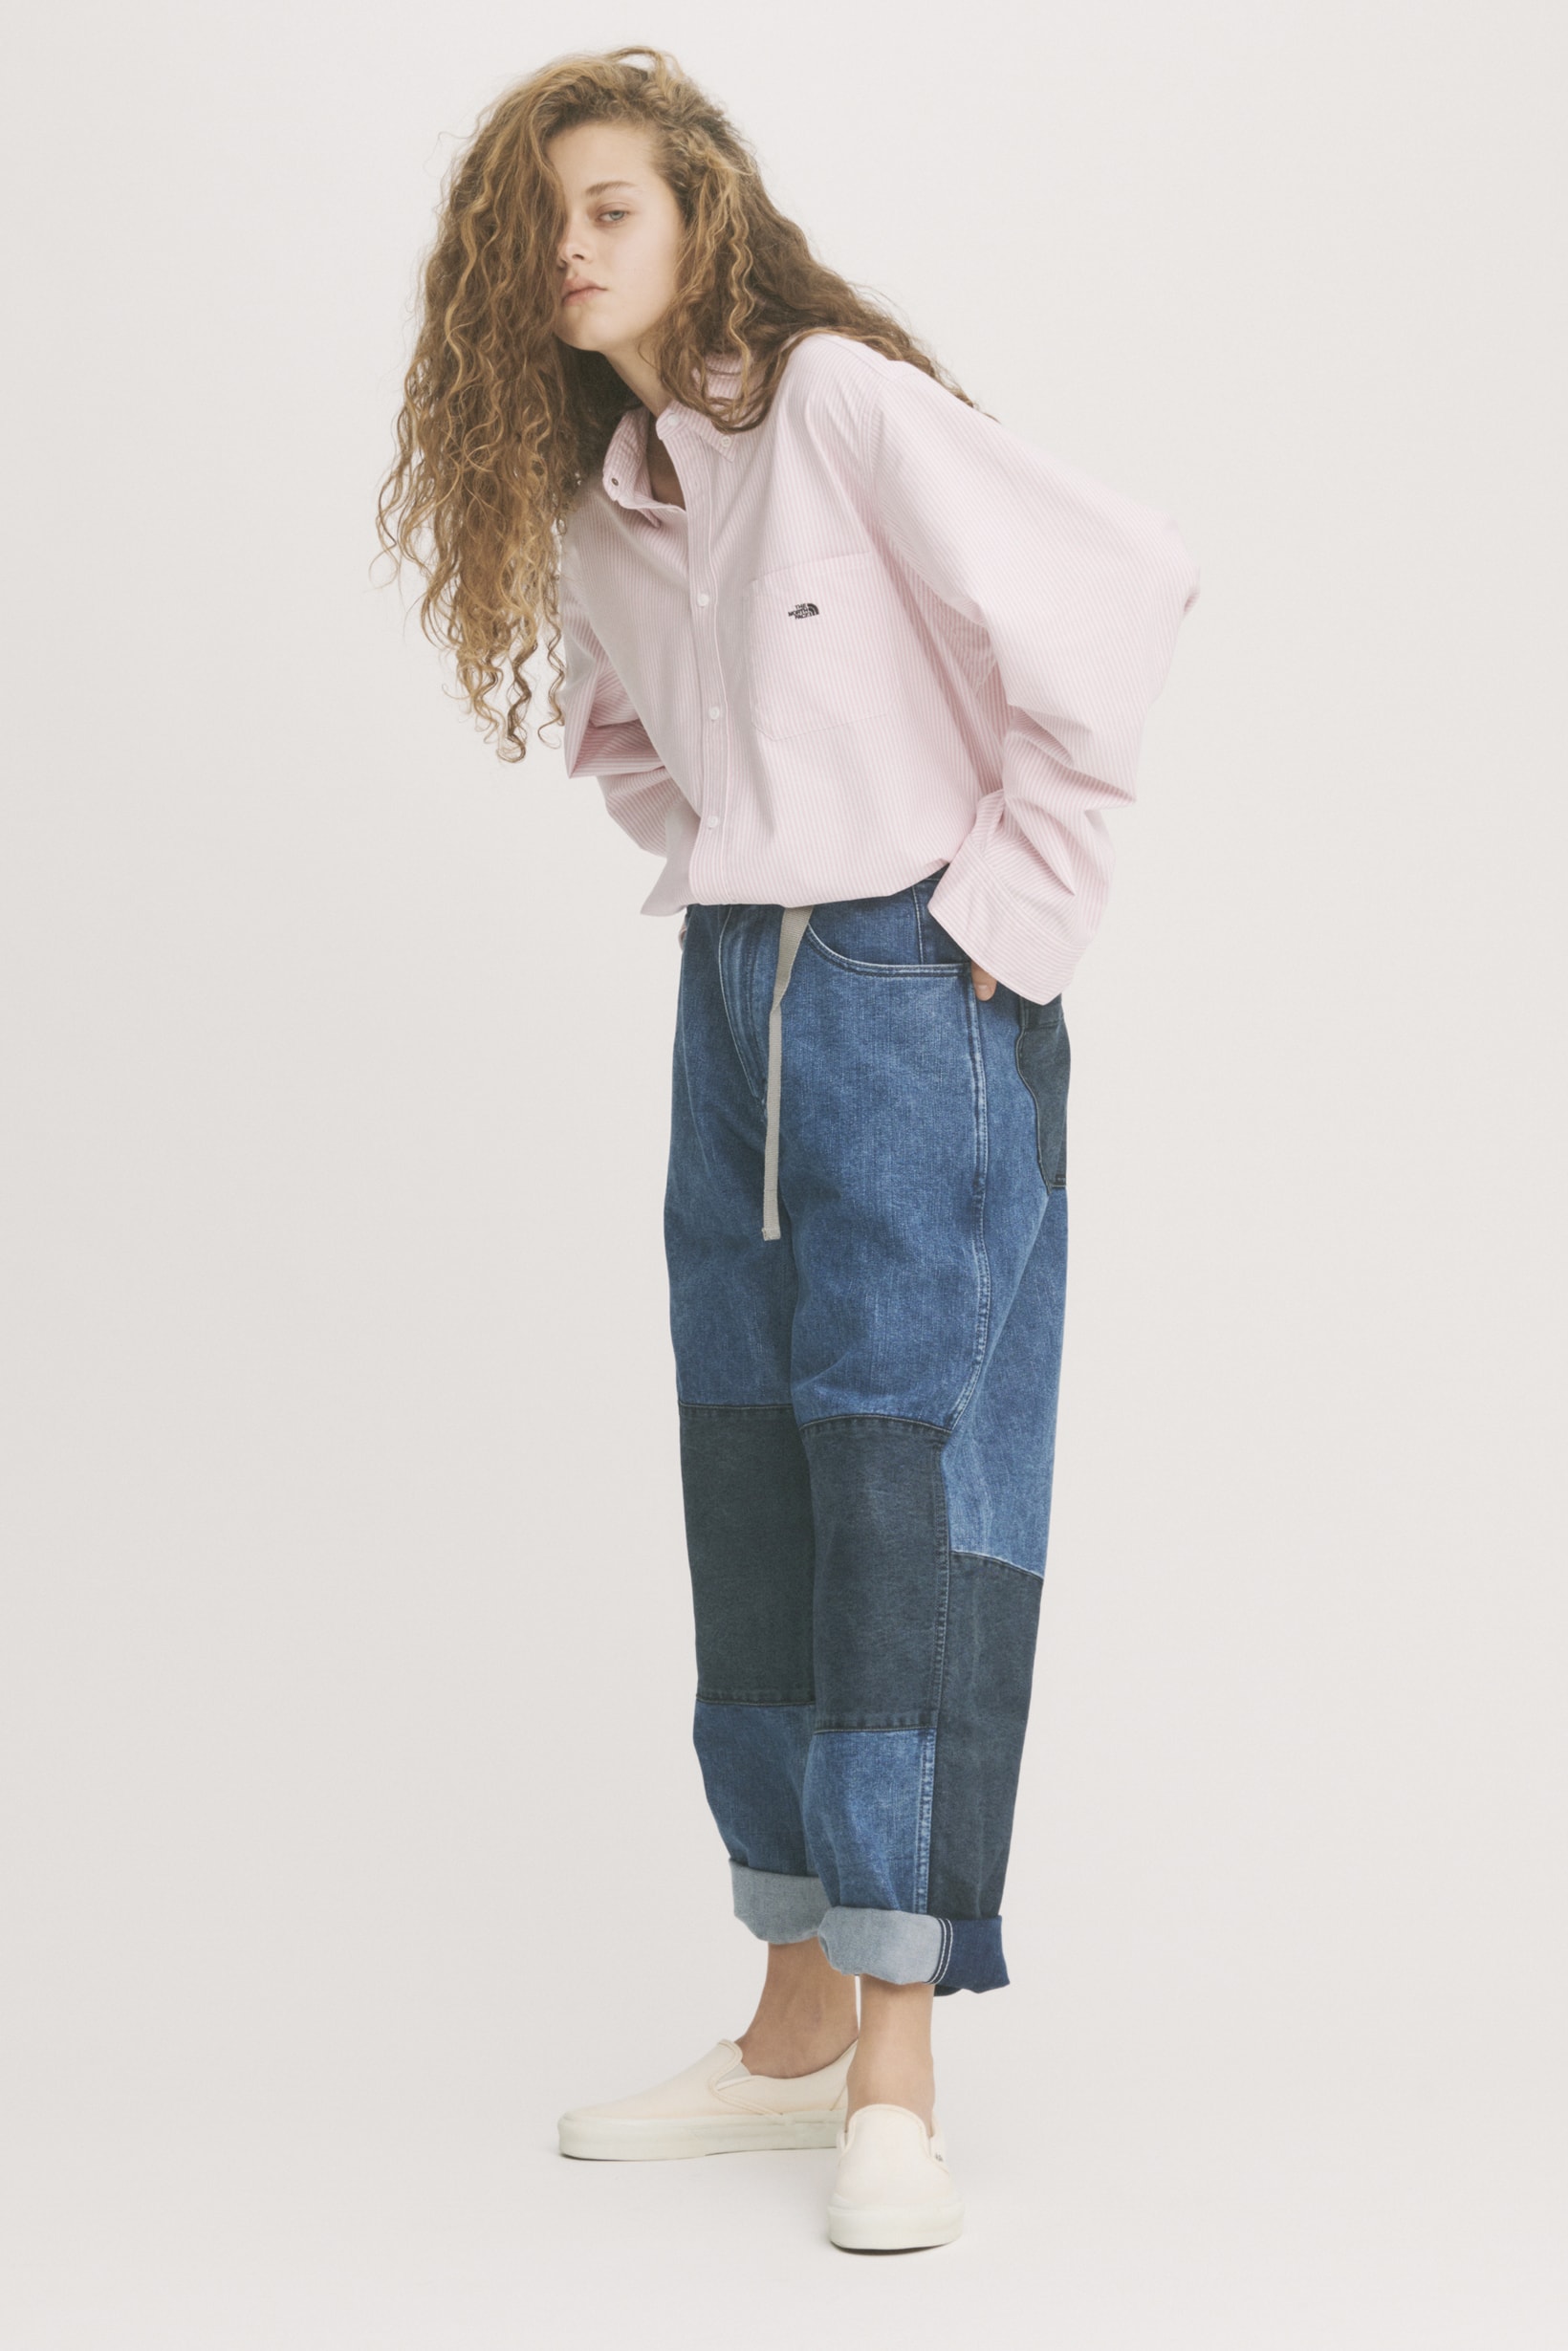 THE NORTH FACE PURPLE LABEL Spring Summer 2019 Lookbook Shirt Pink Pants Blue